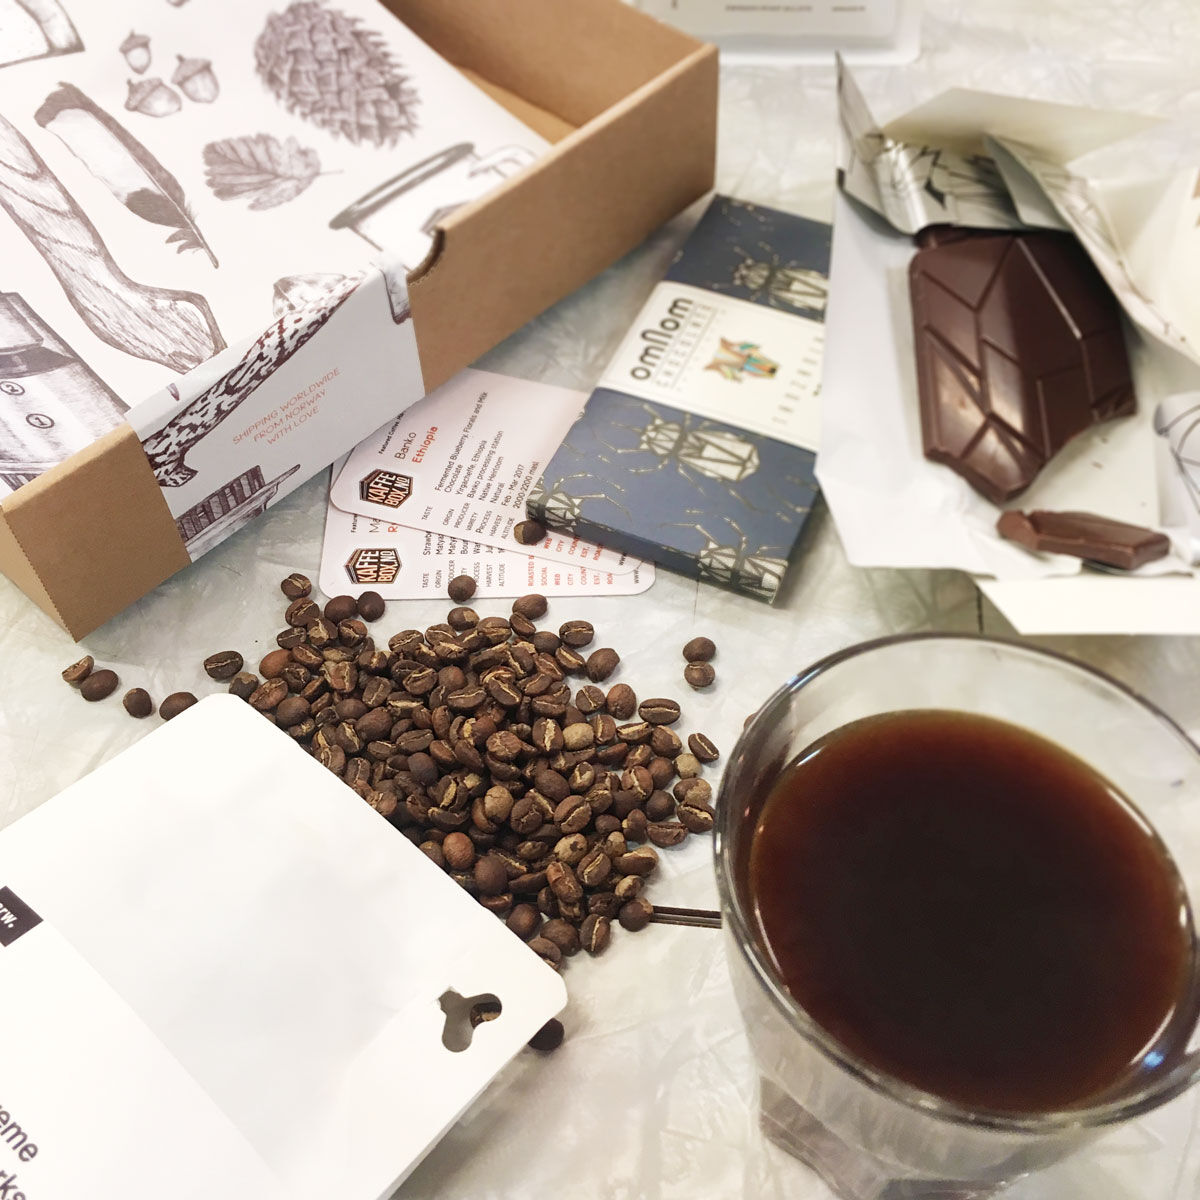 KaffeBox Chocolate Pairing Subscription - No coffee (only chocolate), 4 bars